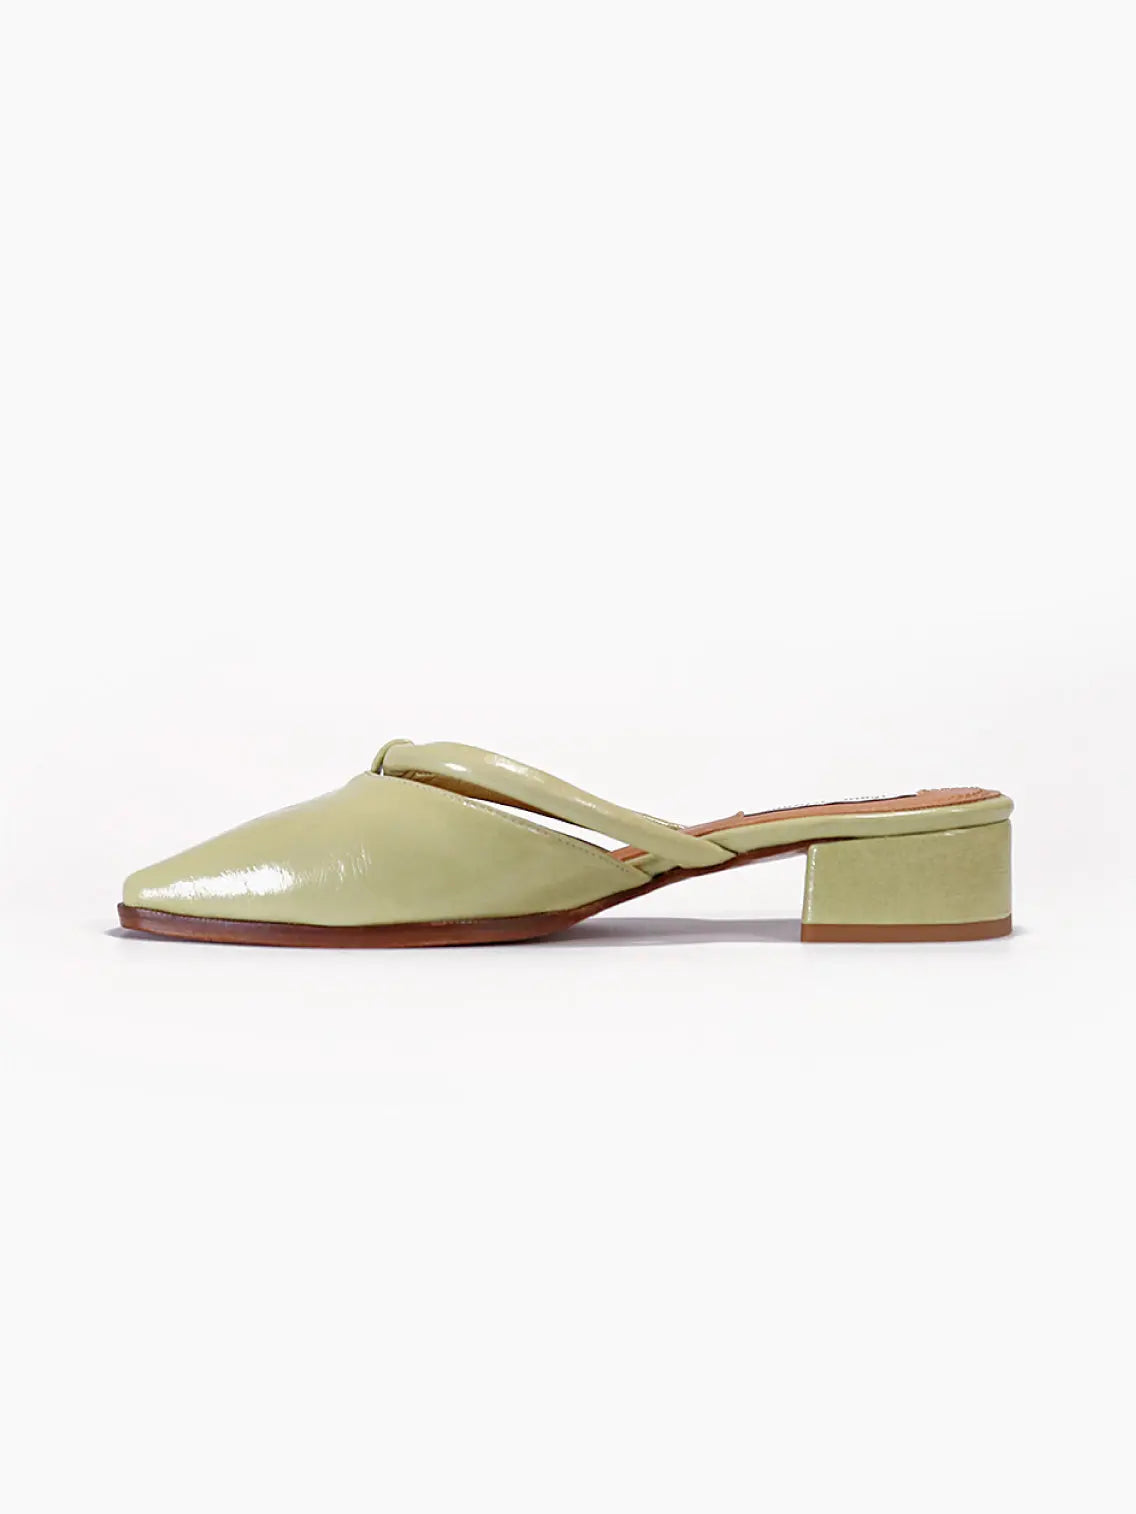 Side view of a light green patent leather Simone Oil Sandals by About Arianne with a pointed toe, a low block heel, and a twisted strap detail across the front. The sole is a contrasting brown color. Photographed on a white background, this stylish piece is available at Bassalstore in Barcelona.